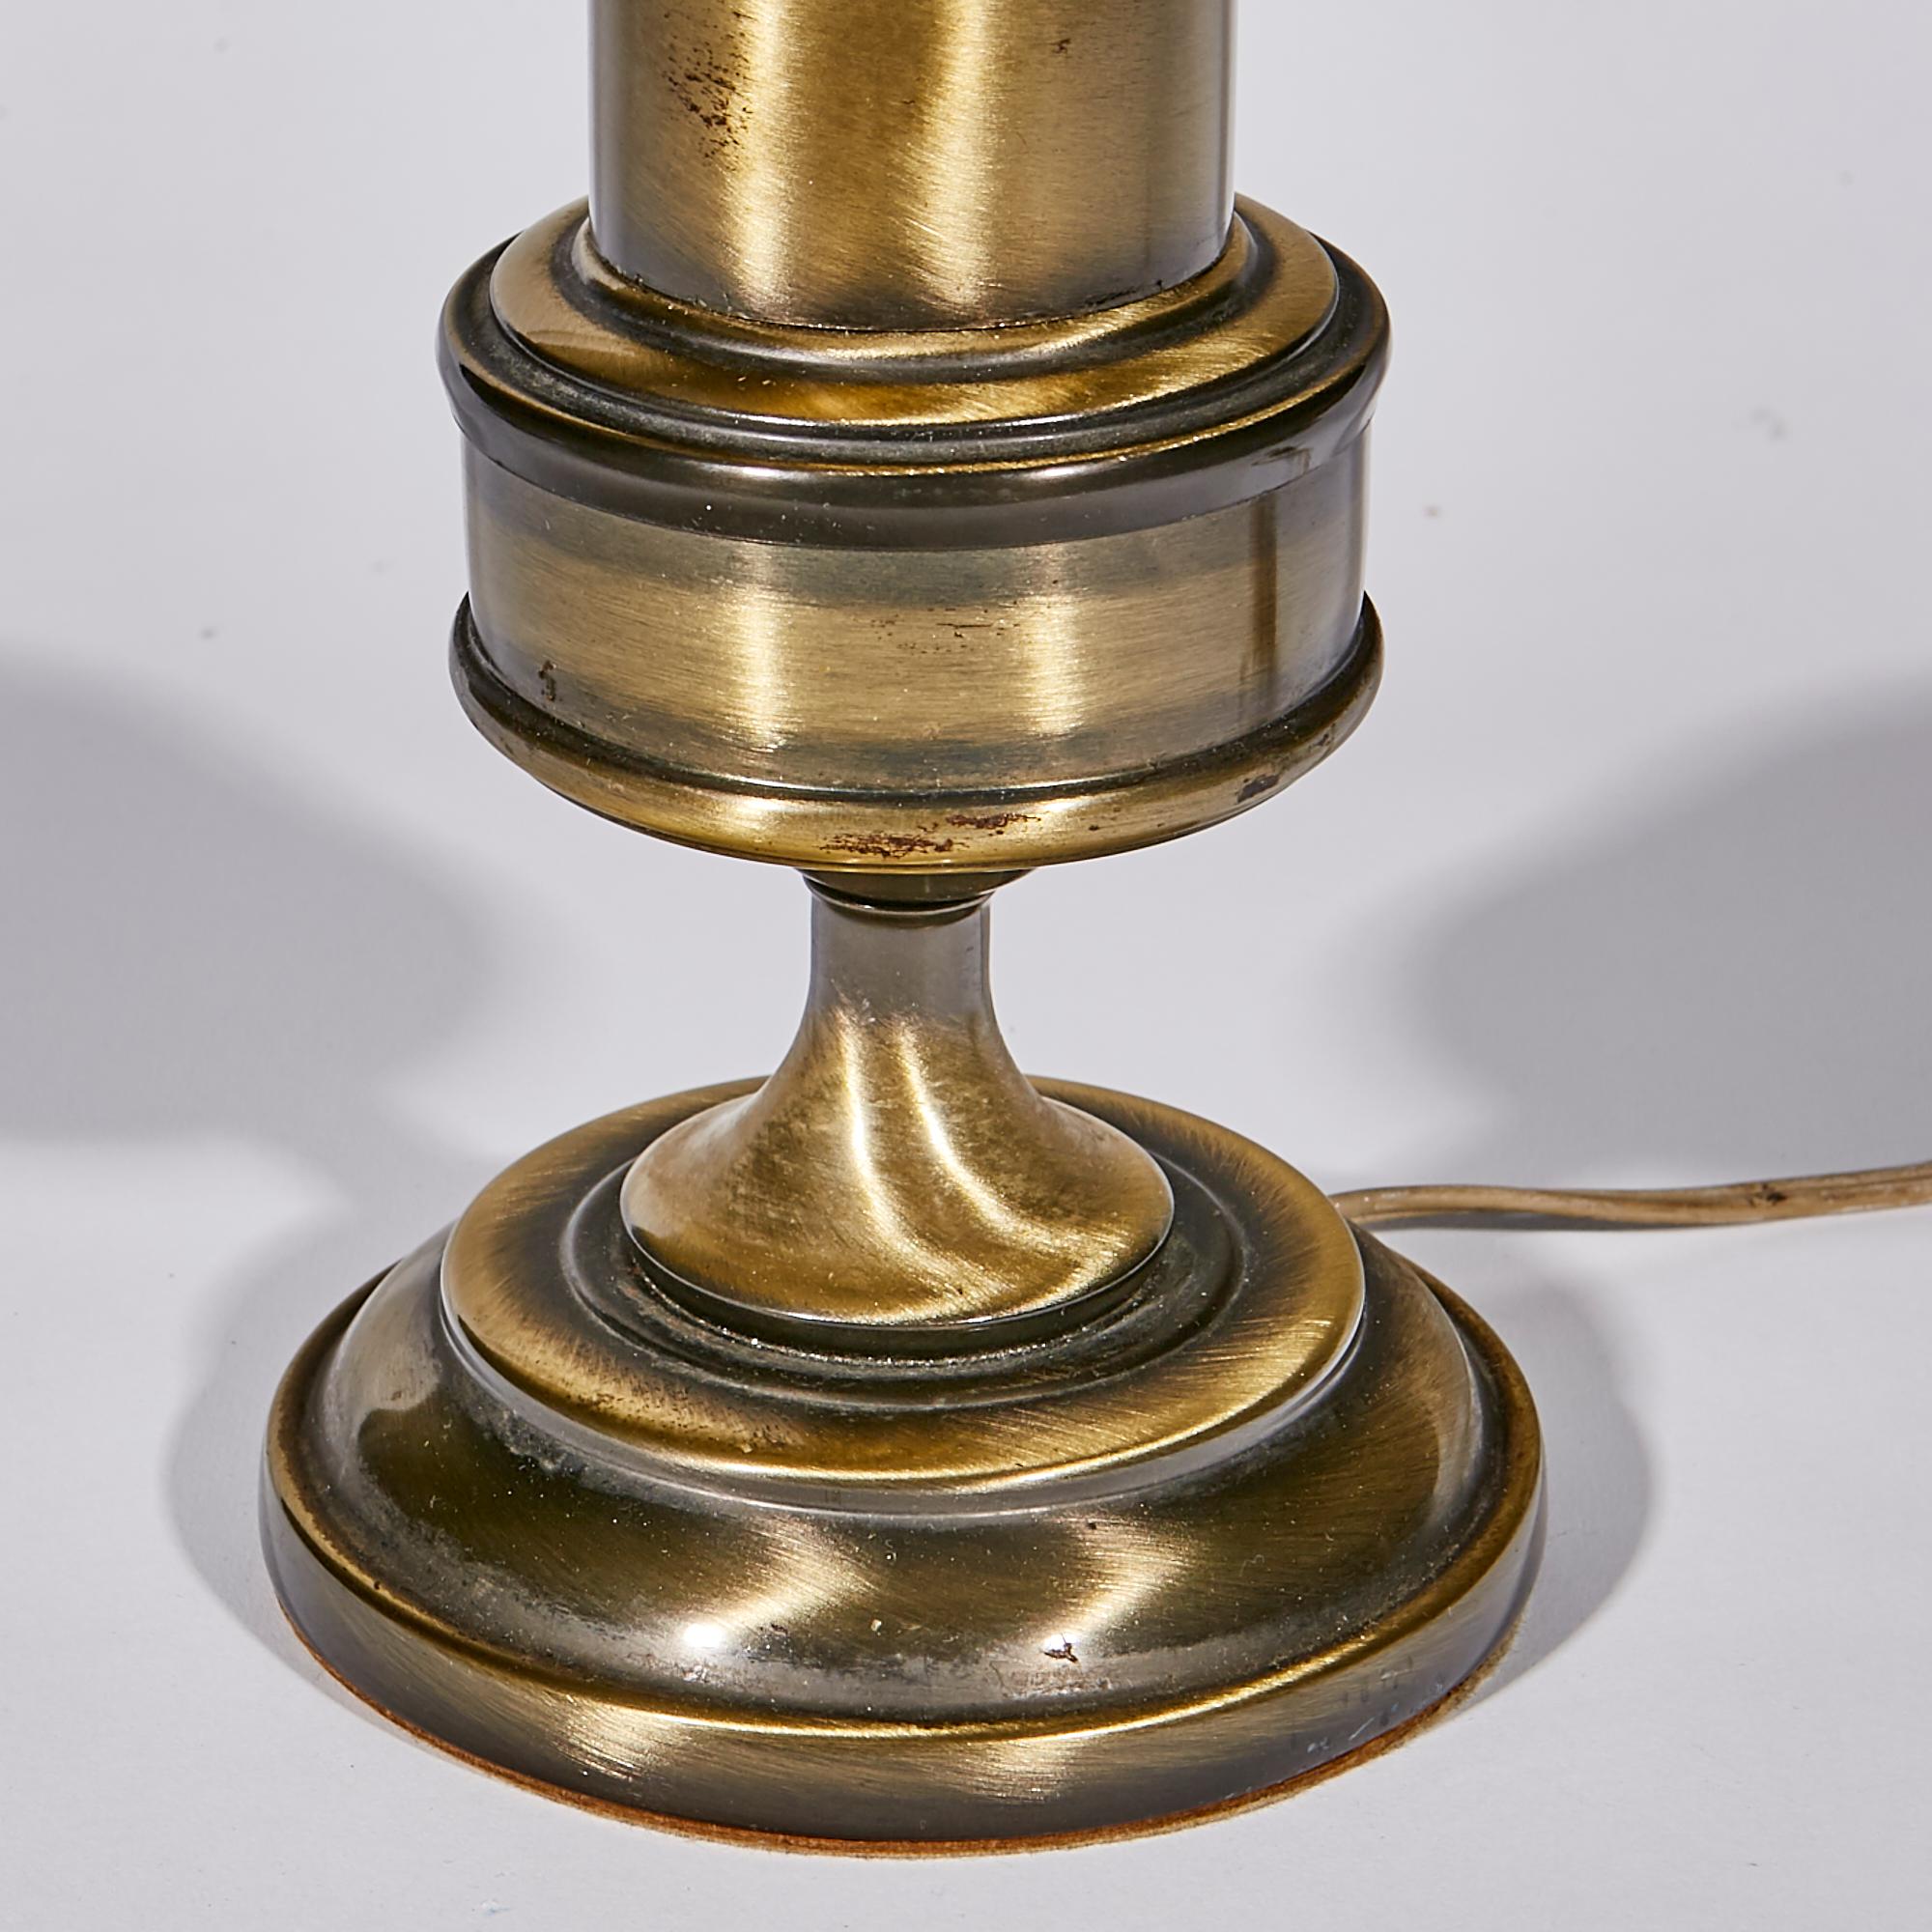 1960s burnished brass table or desk lamp. The lamp has a metal shade. Wired for the US and in working condition. Uses two standard bulbs. No maker's mark.
   